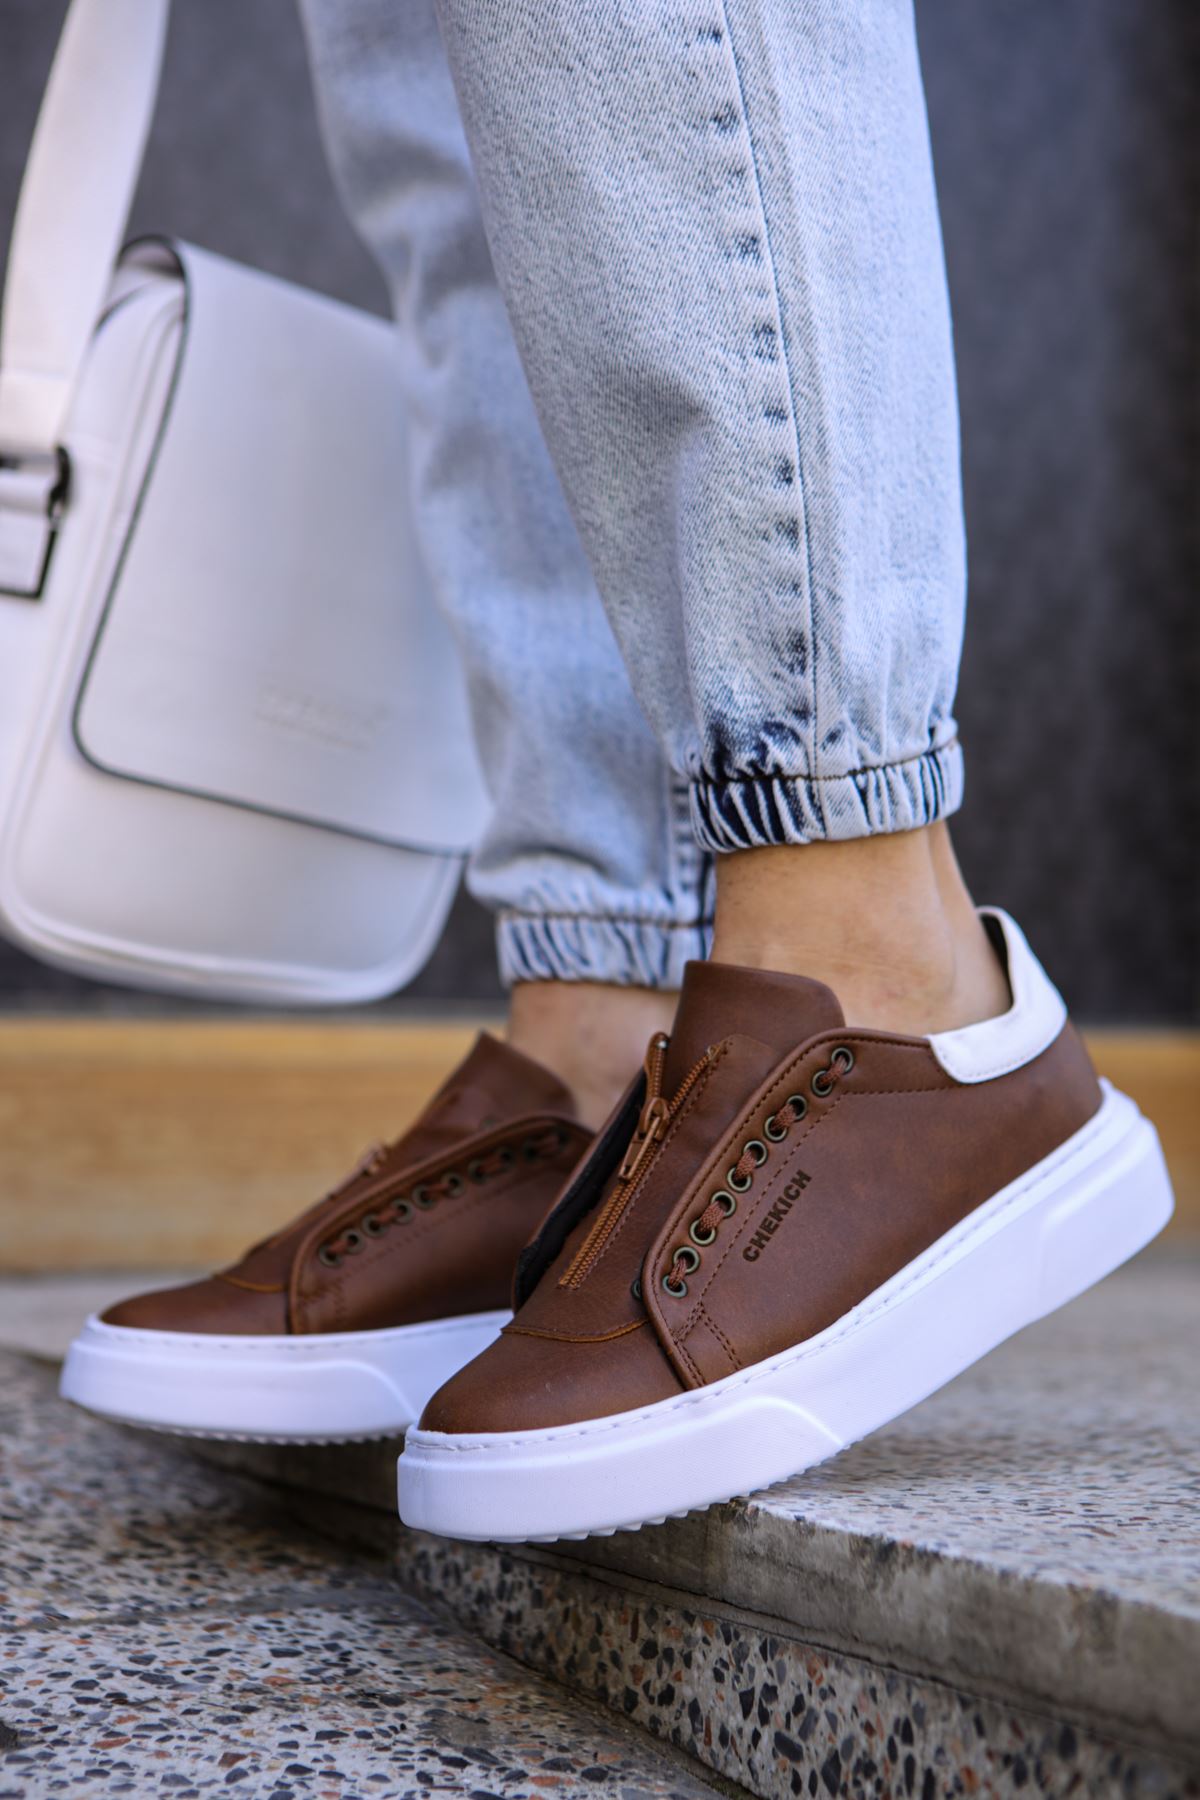 Chekich Men's Shoes Tan and White Sneakers Artificial Leather Spring Fall 2021 Season Zipper Casual Sport Original Vulcanized Breathable Lightweight Brown Sneakers Odorless Hot Sale Comfortable Footwear Hiking CH092 V1